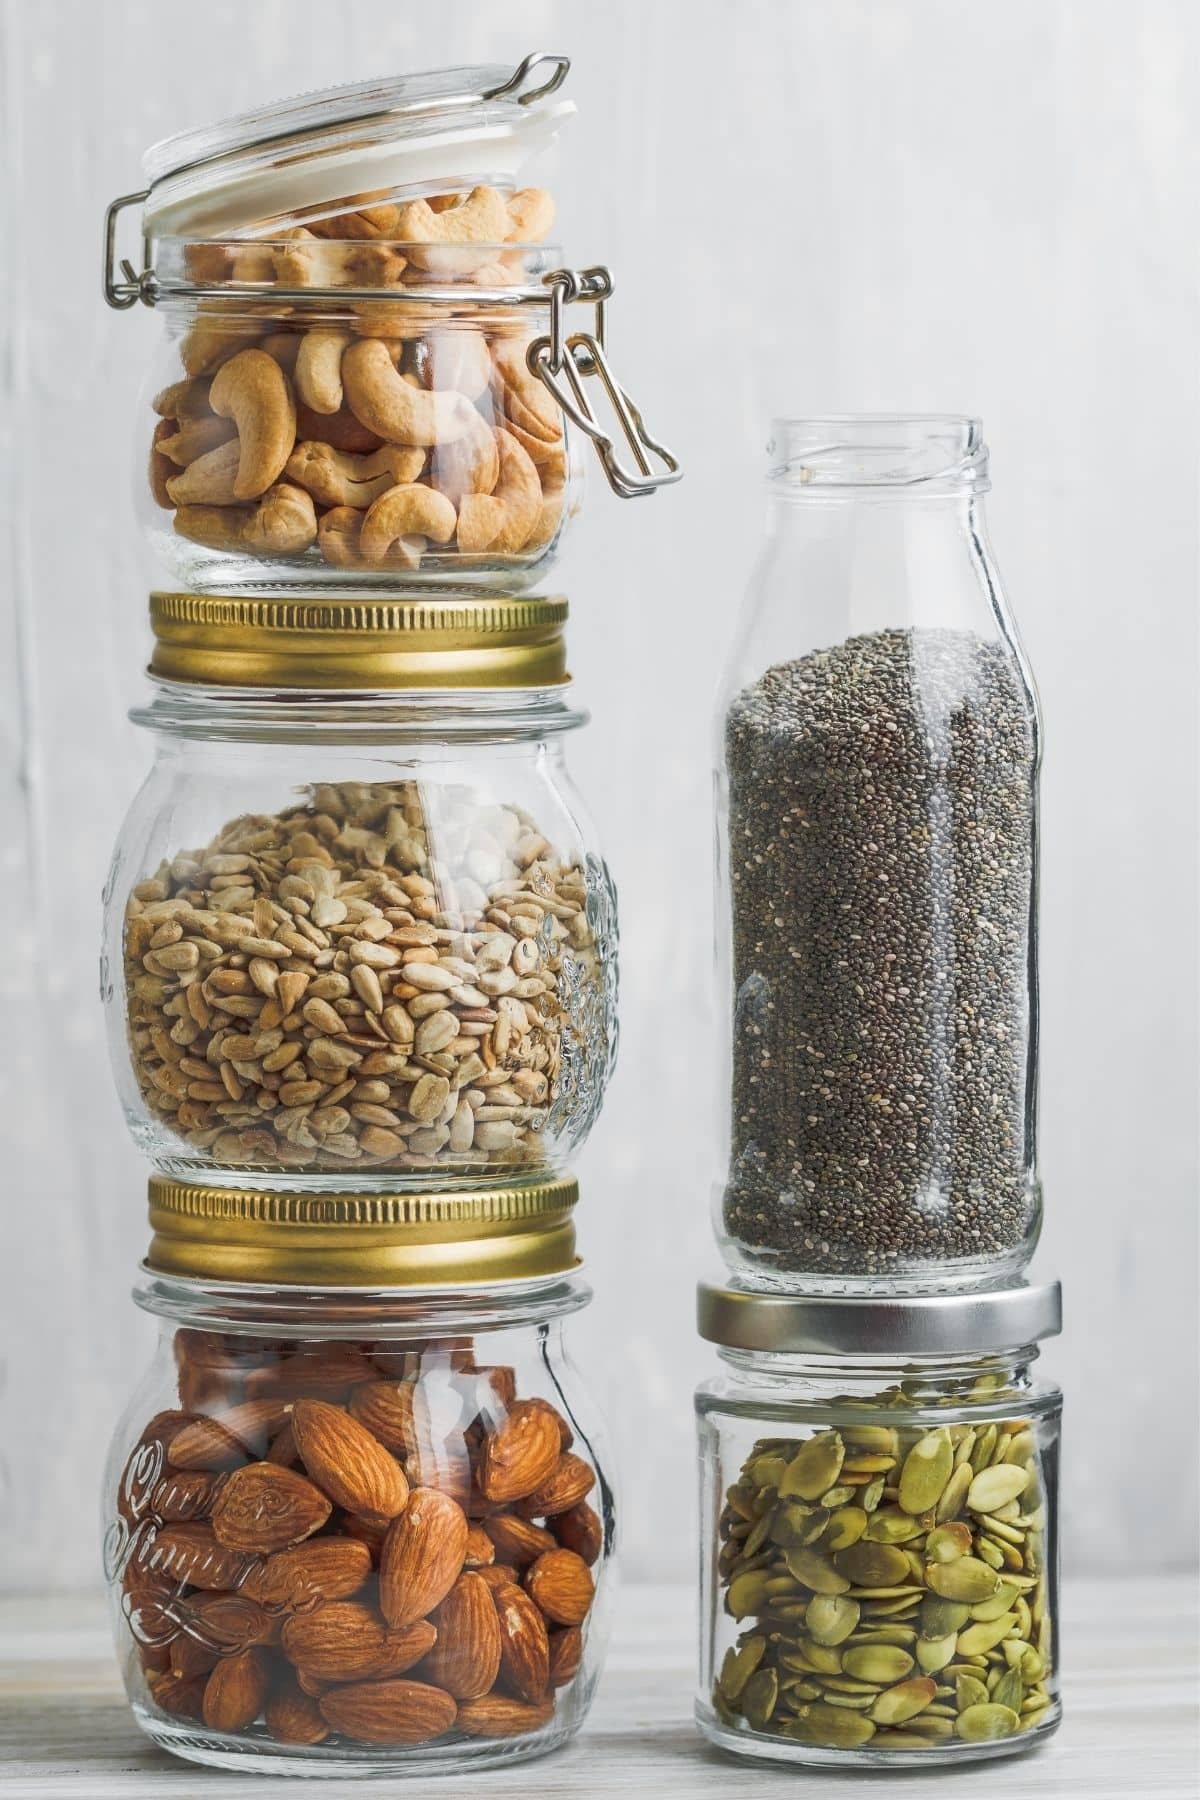 nuts and seeds in jars stacked on a table.